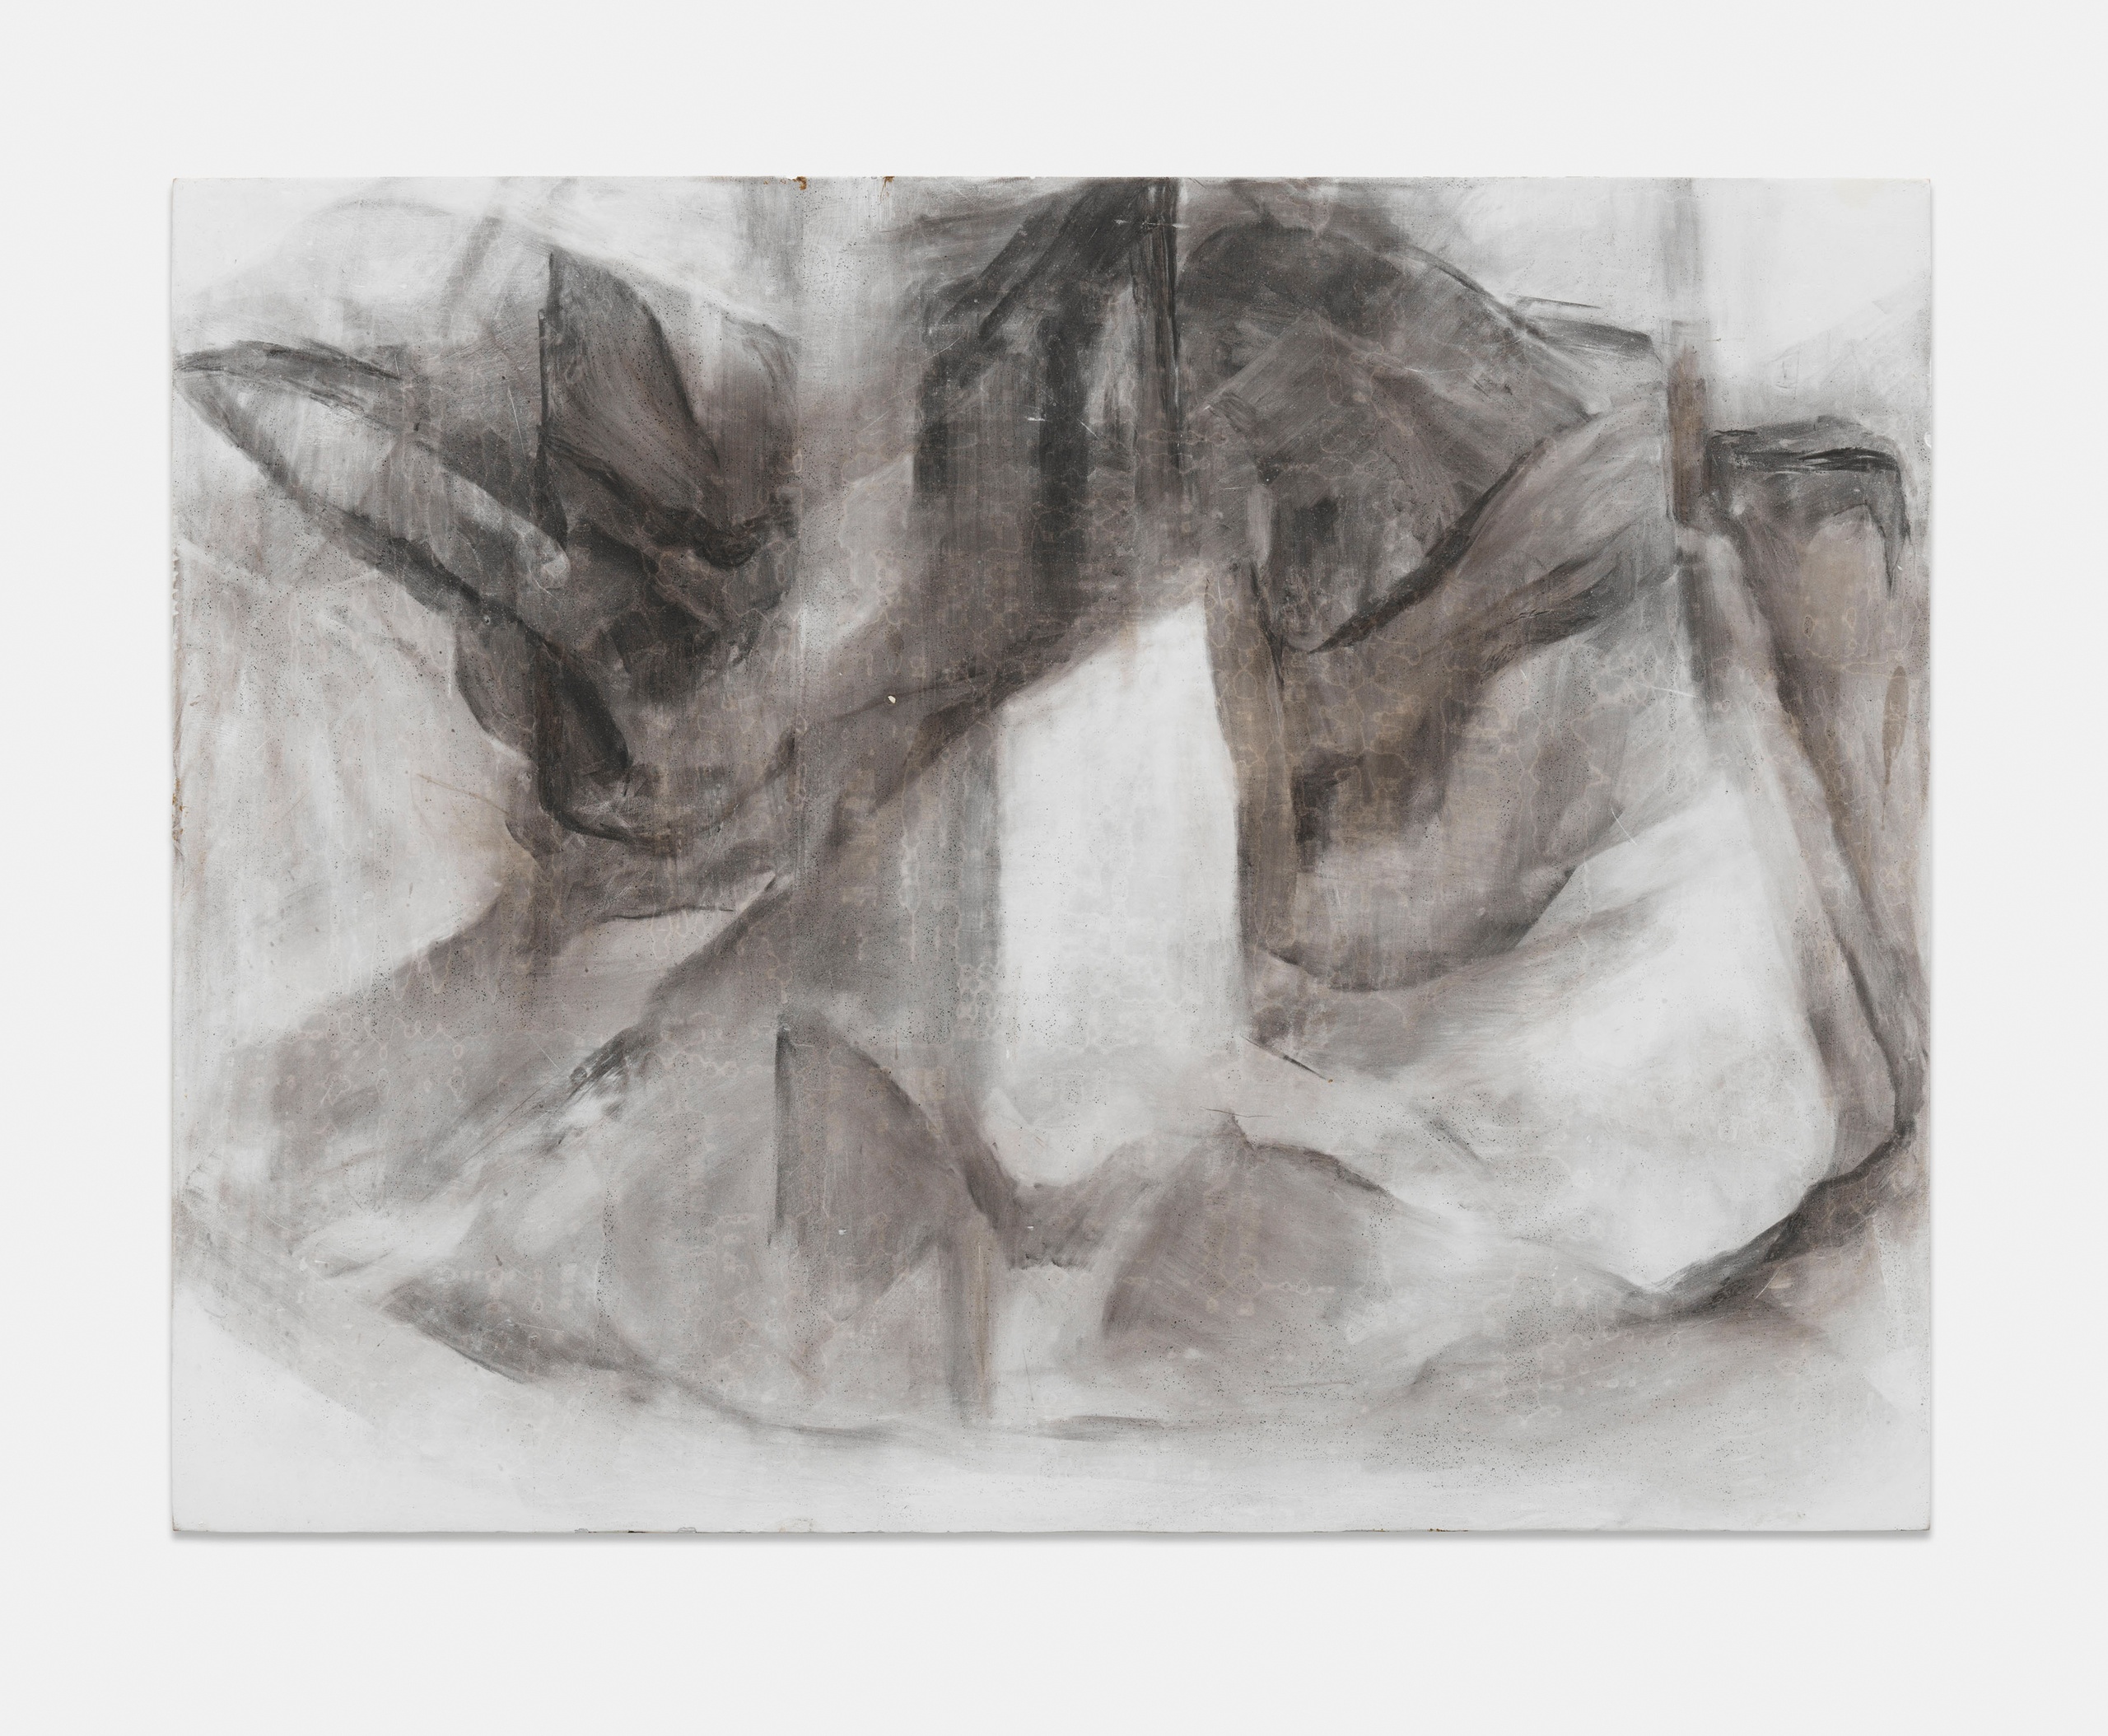 Beaux MendesUntitled, 2023charcoal on marble dust on panel29 x 37 cm | 11 1/2 x 14 1/2 in